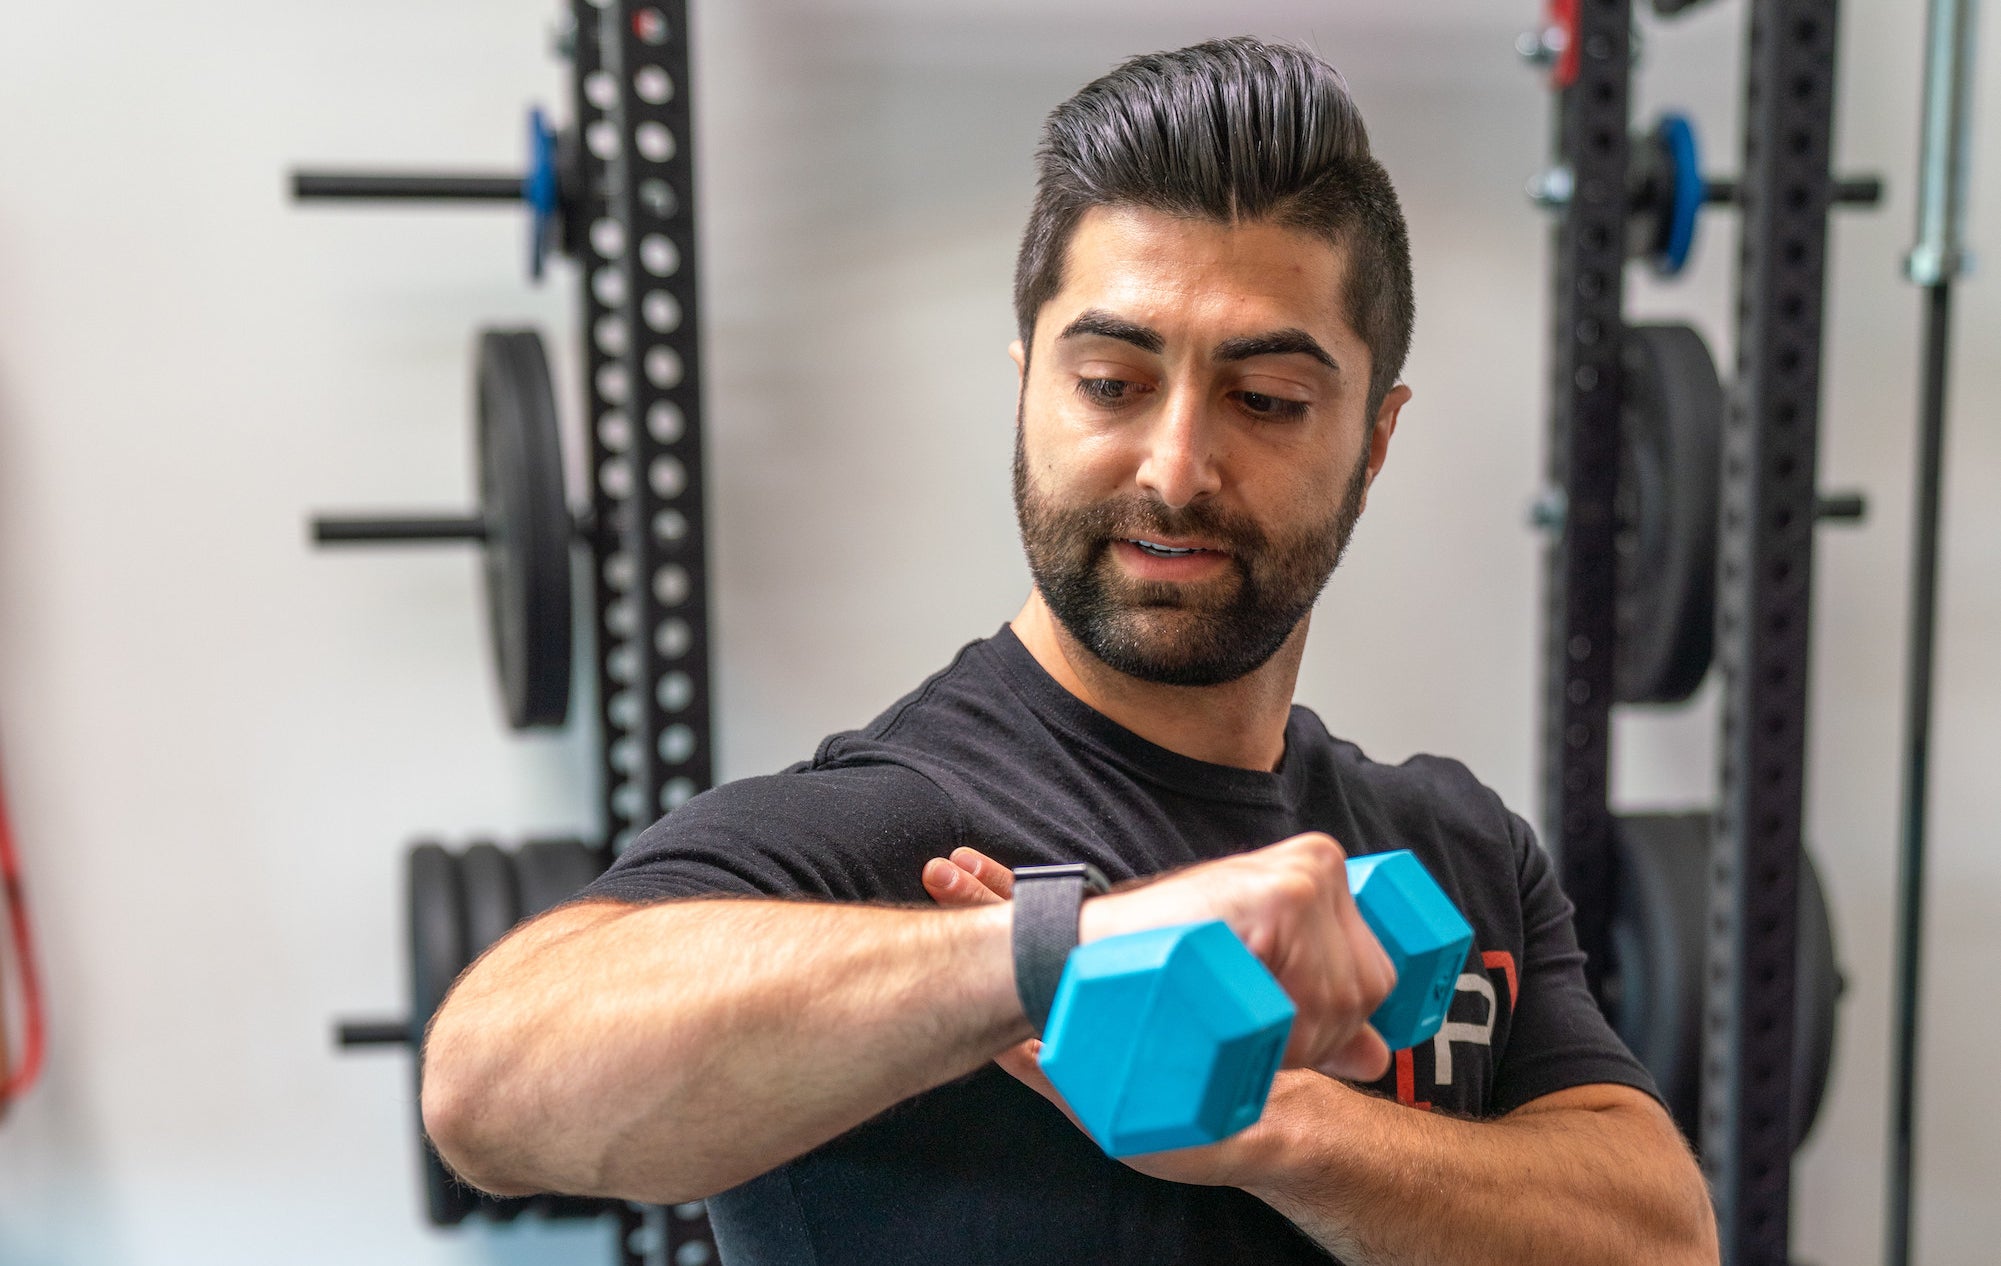 Dr. Arash Maghsoodi performs a shoulder exercise with a weight while holding his shoulder